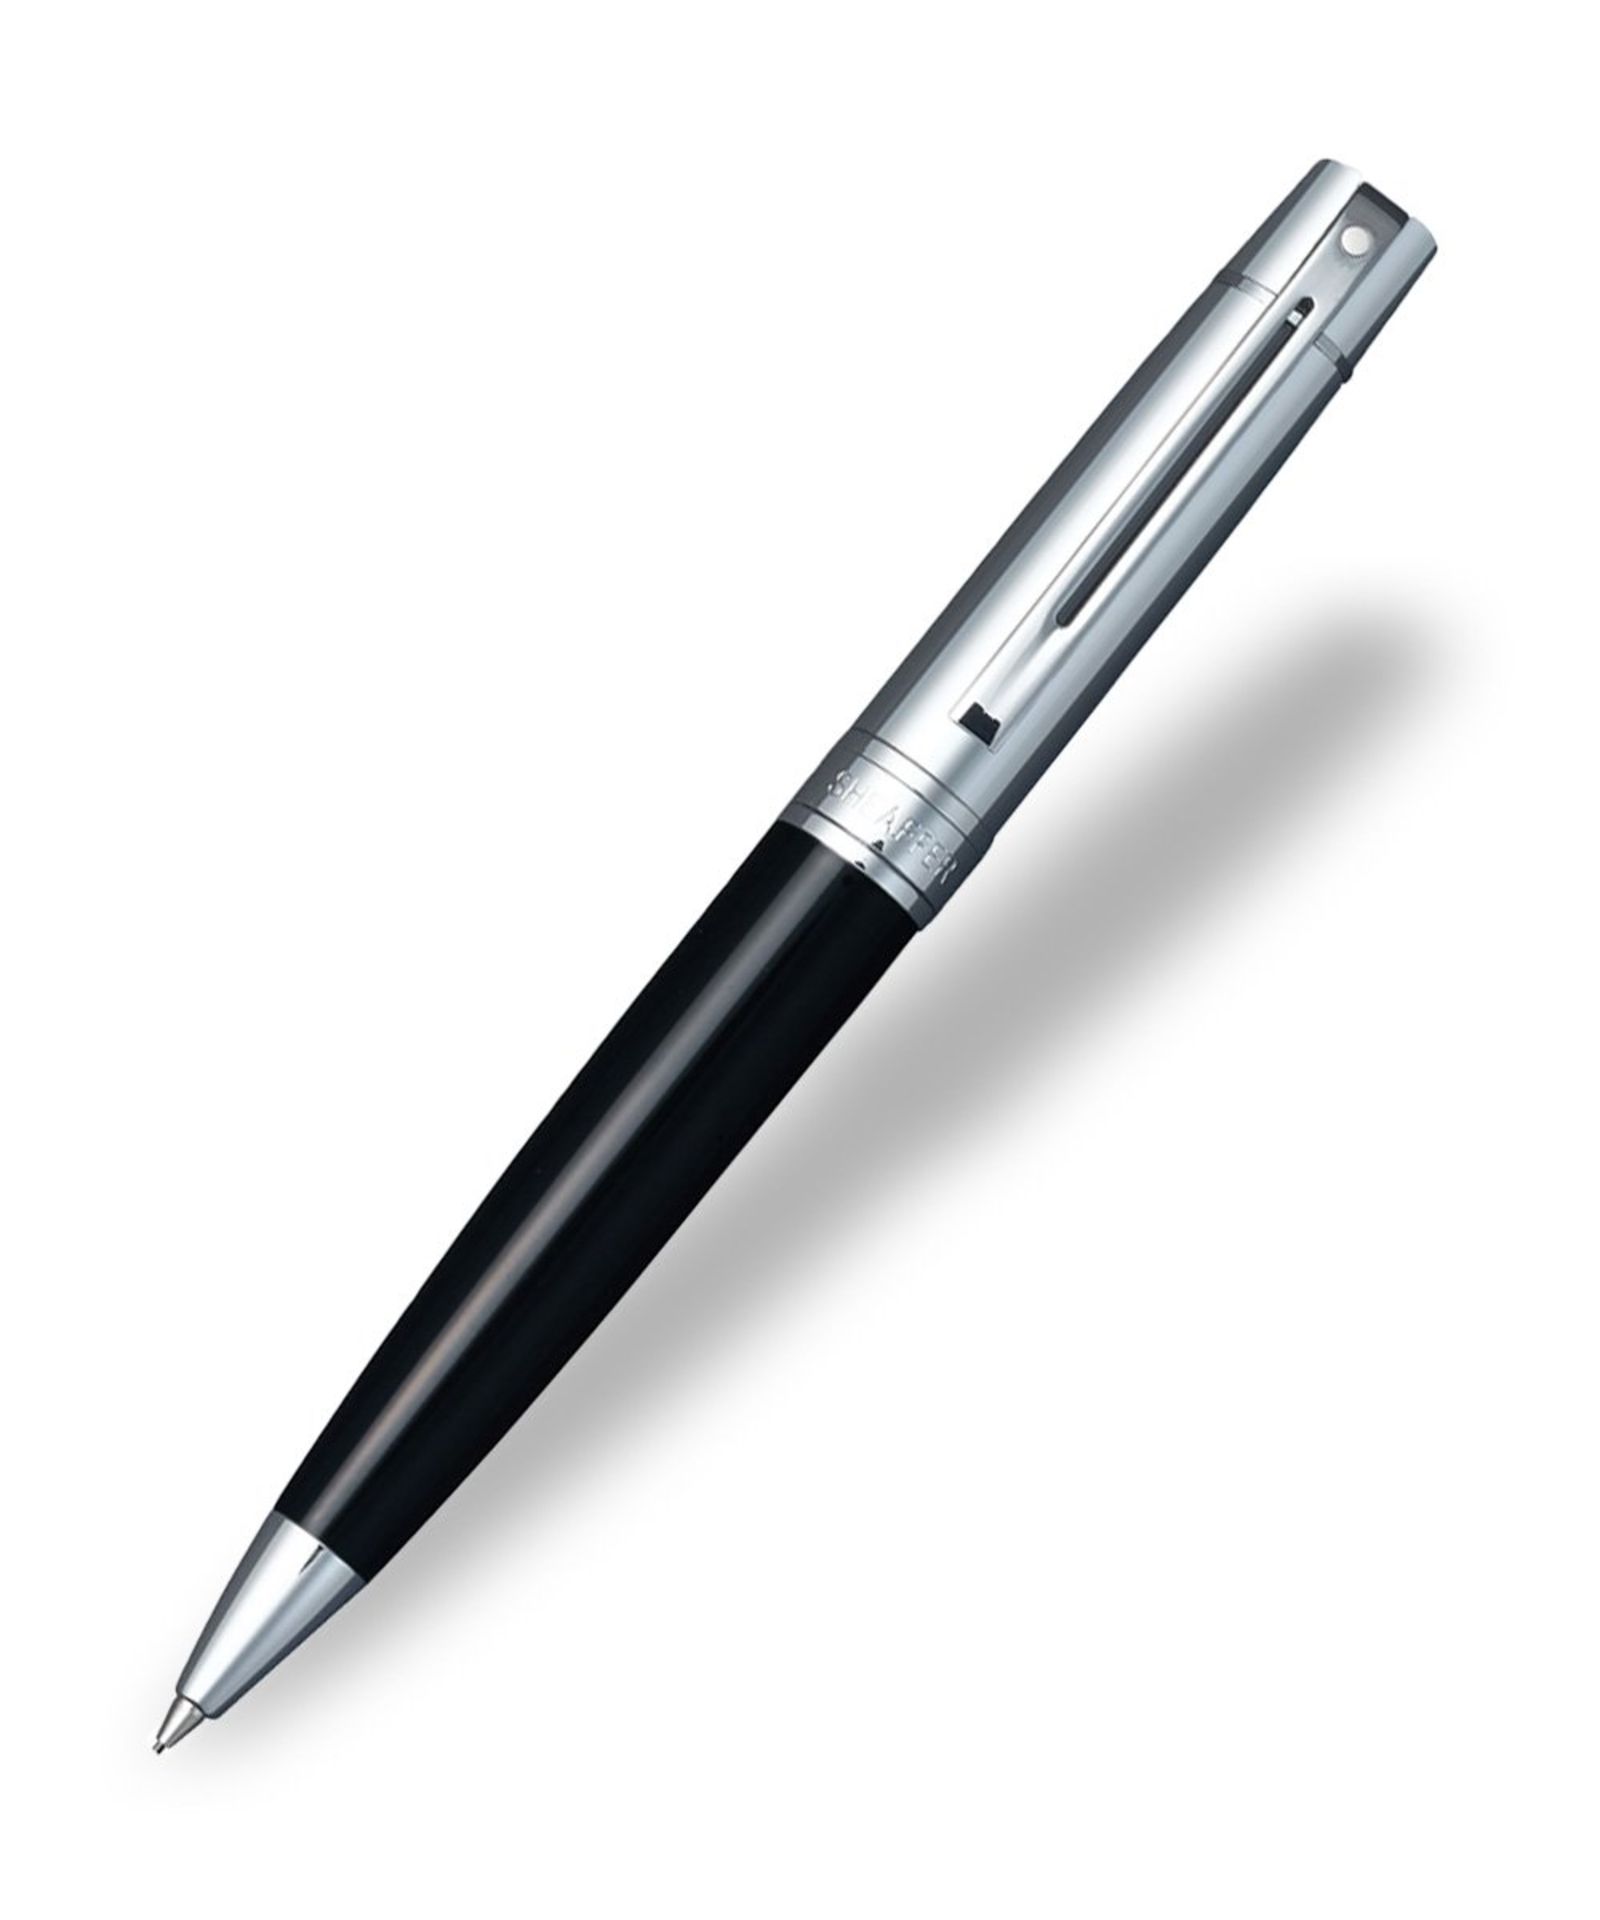 + VAT Brand New Sheaffer Brushed Chrome Cap Pencil In Case - Item is Similar To Image